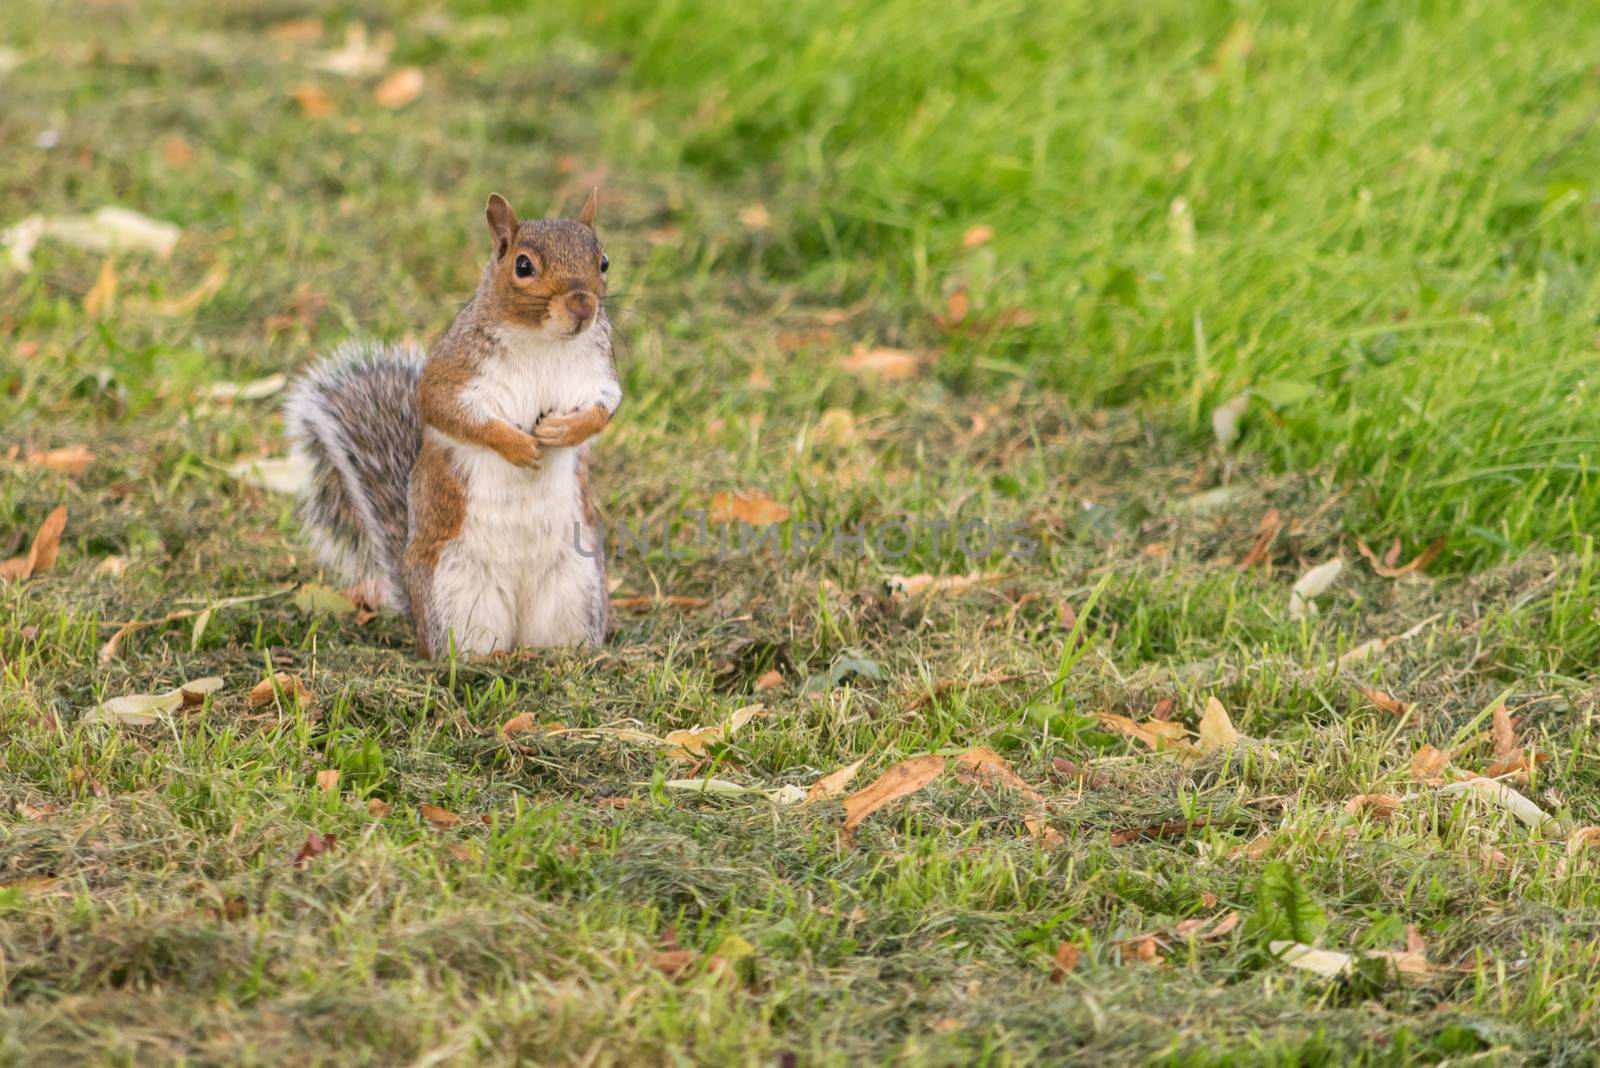 Eye contact with single adorable grey squirrel in a park. by wael_alreweie